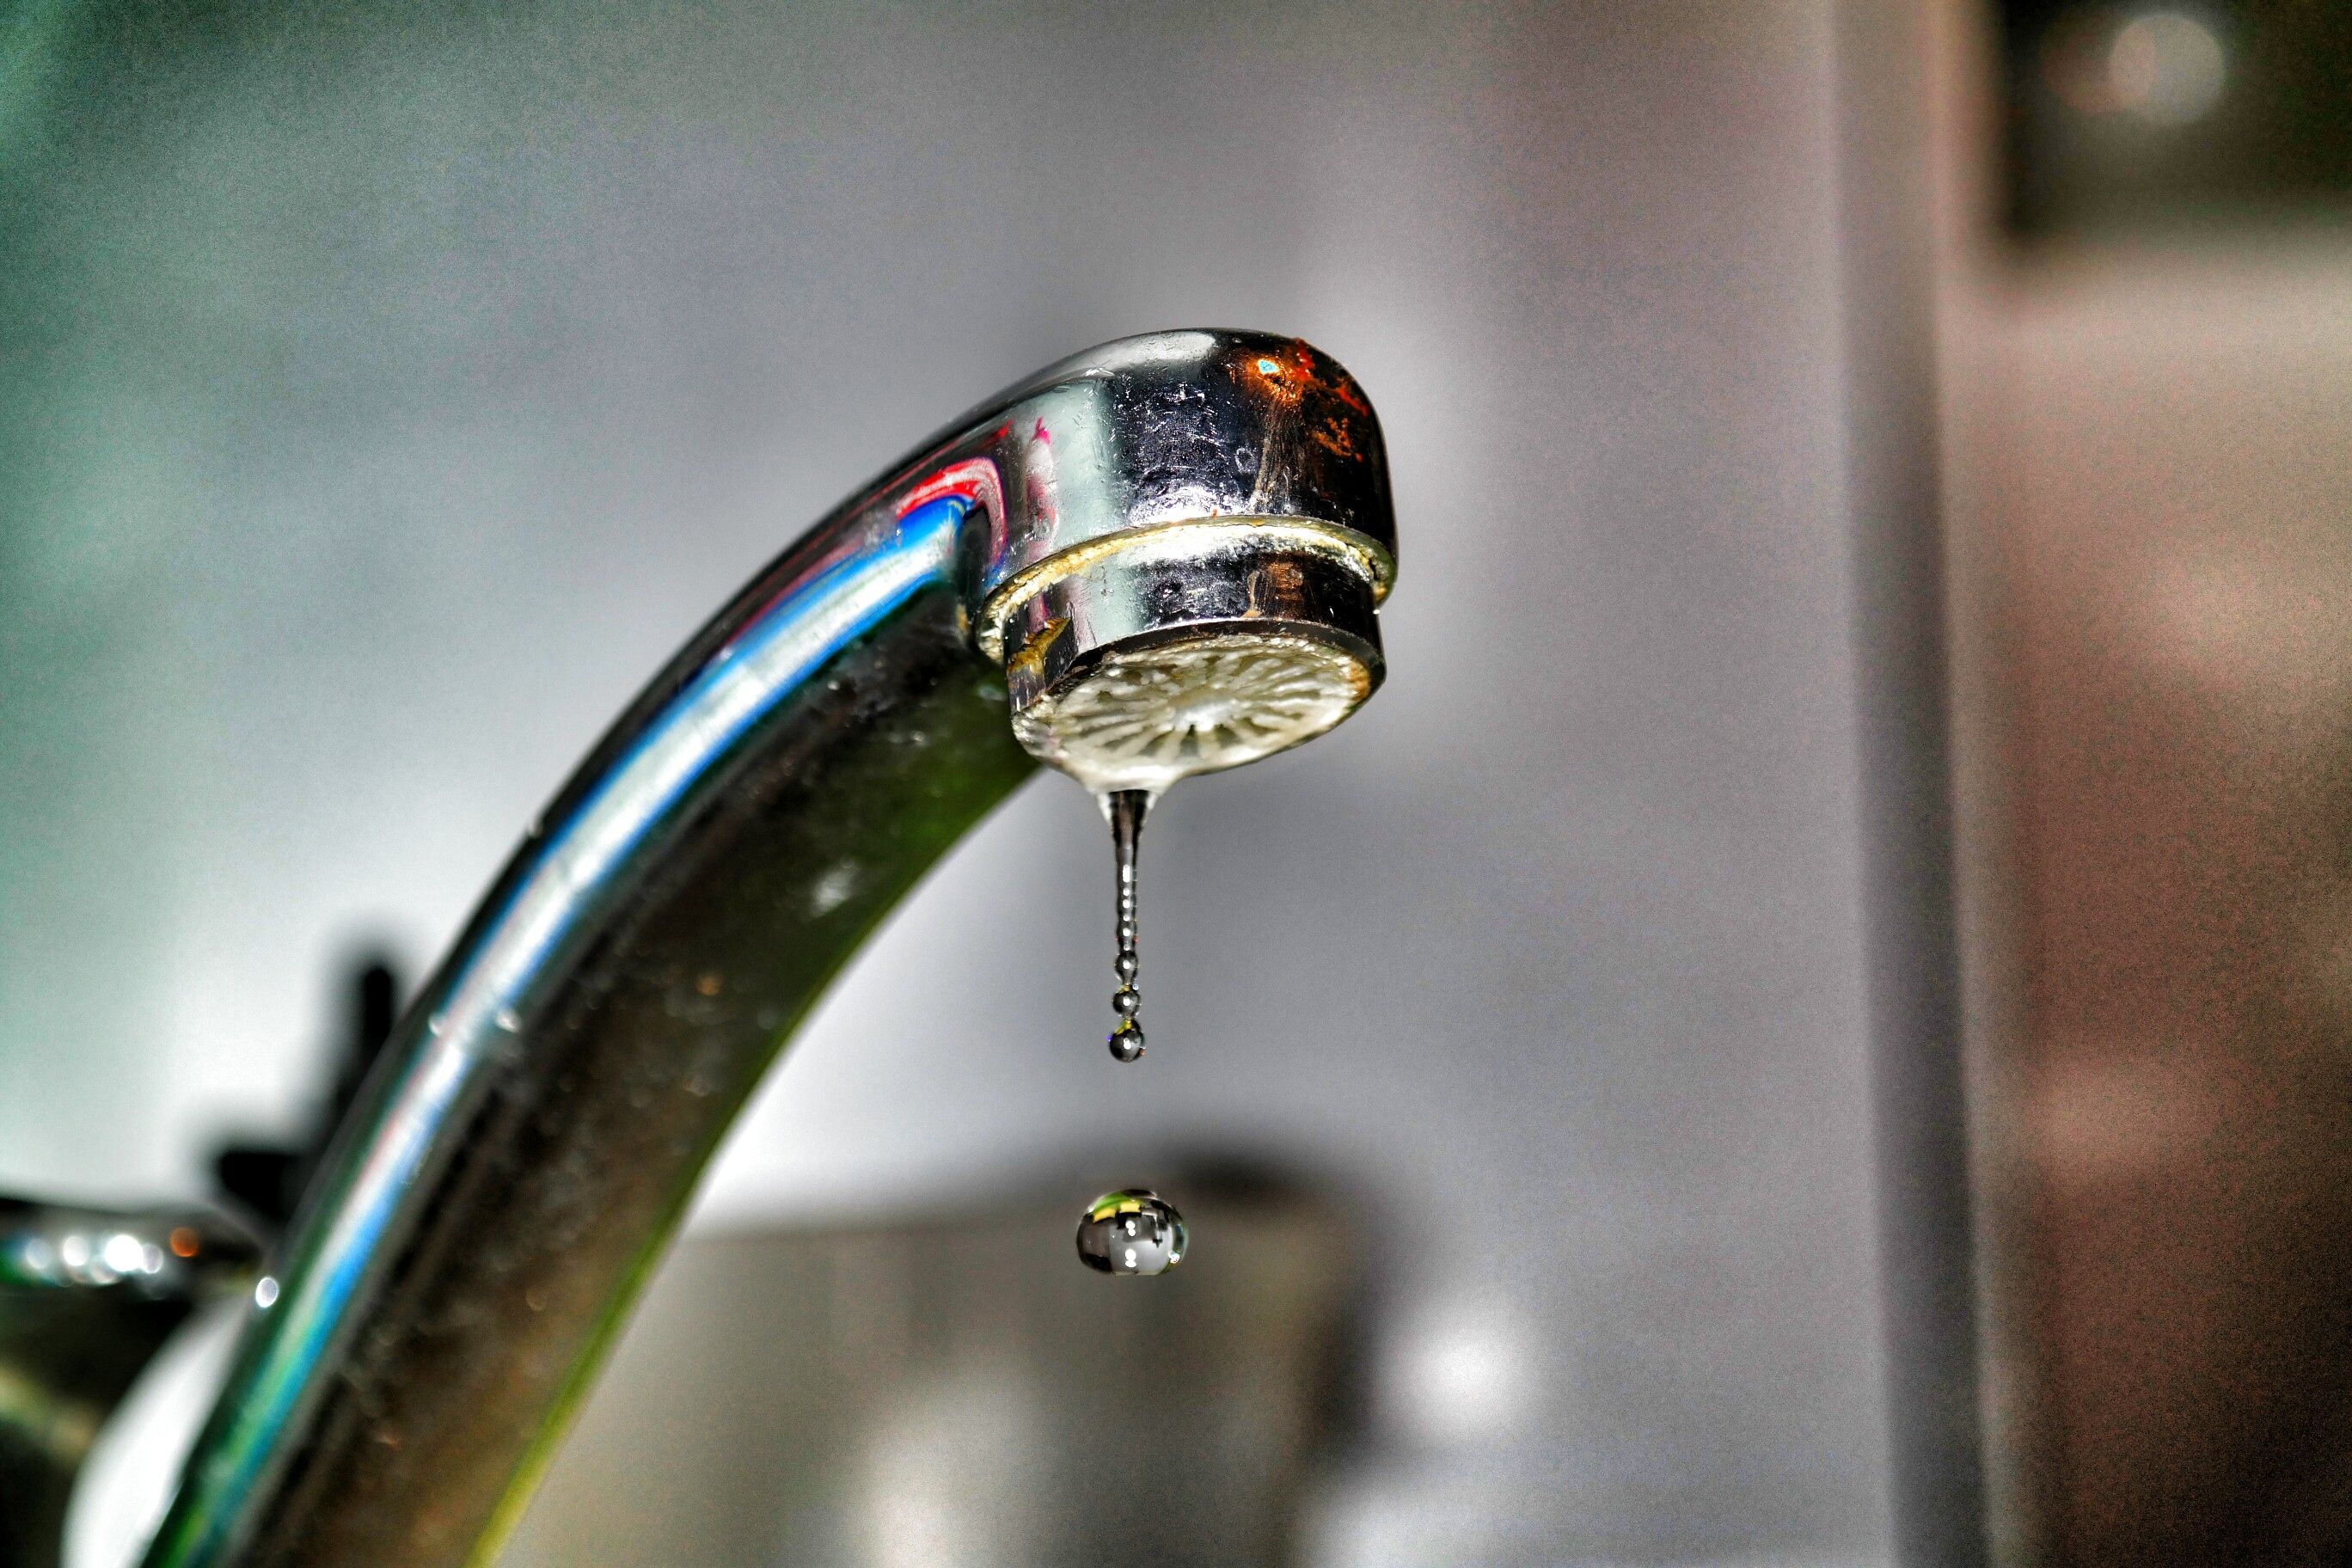 How To Fix A Leaky Faucet In 5 Easy Steps How To Fix Your